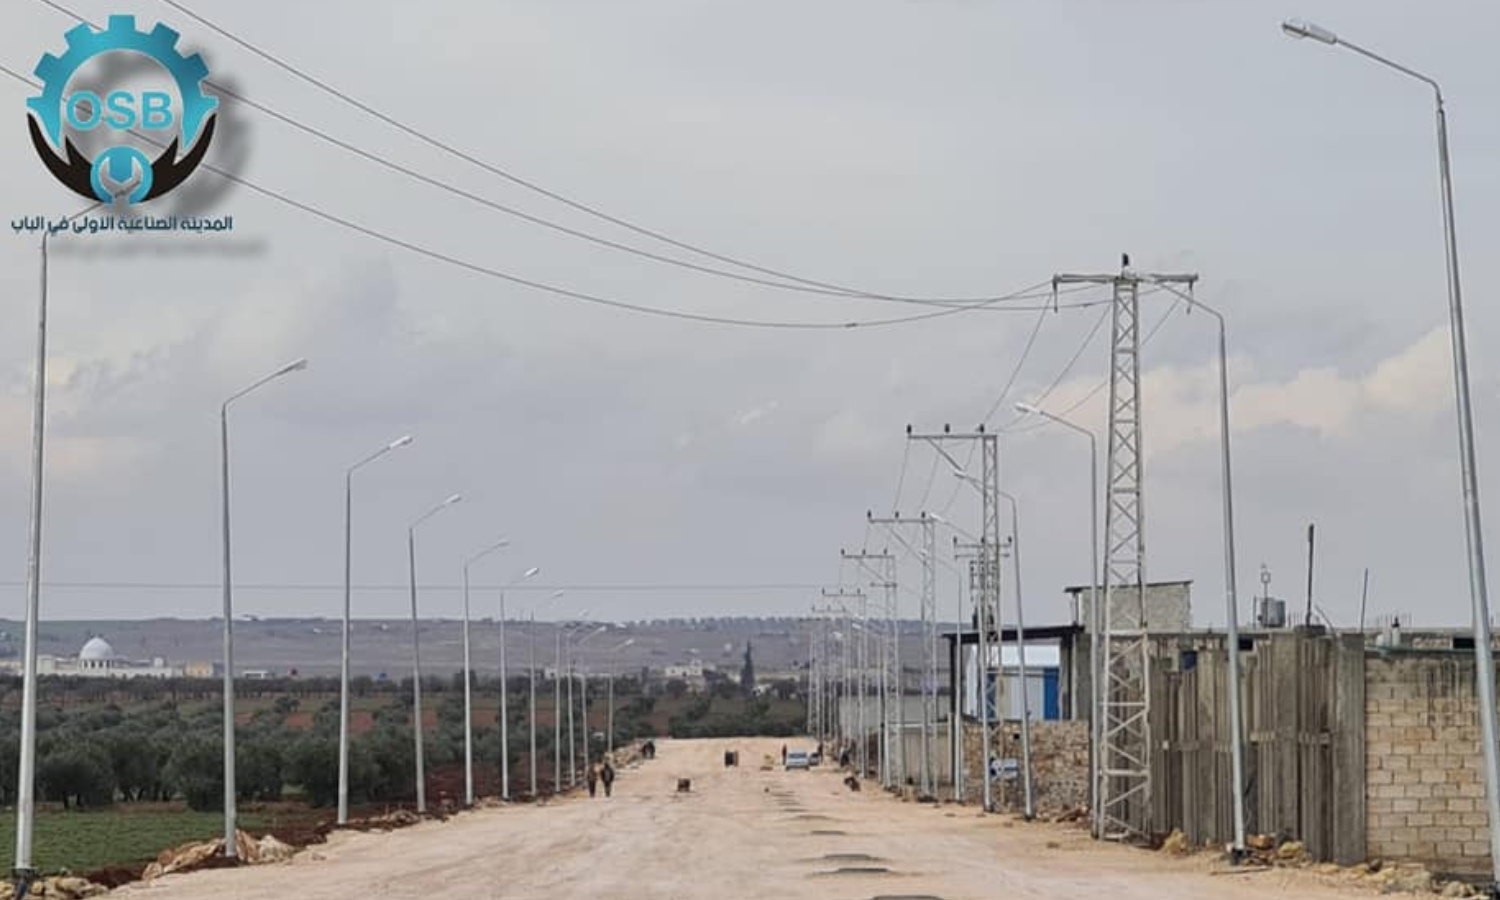 Industrial zones are shaping the economy of Aleppo countryside